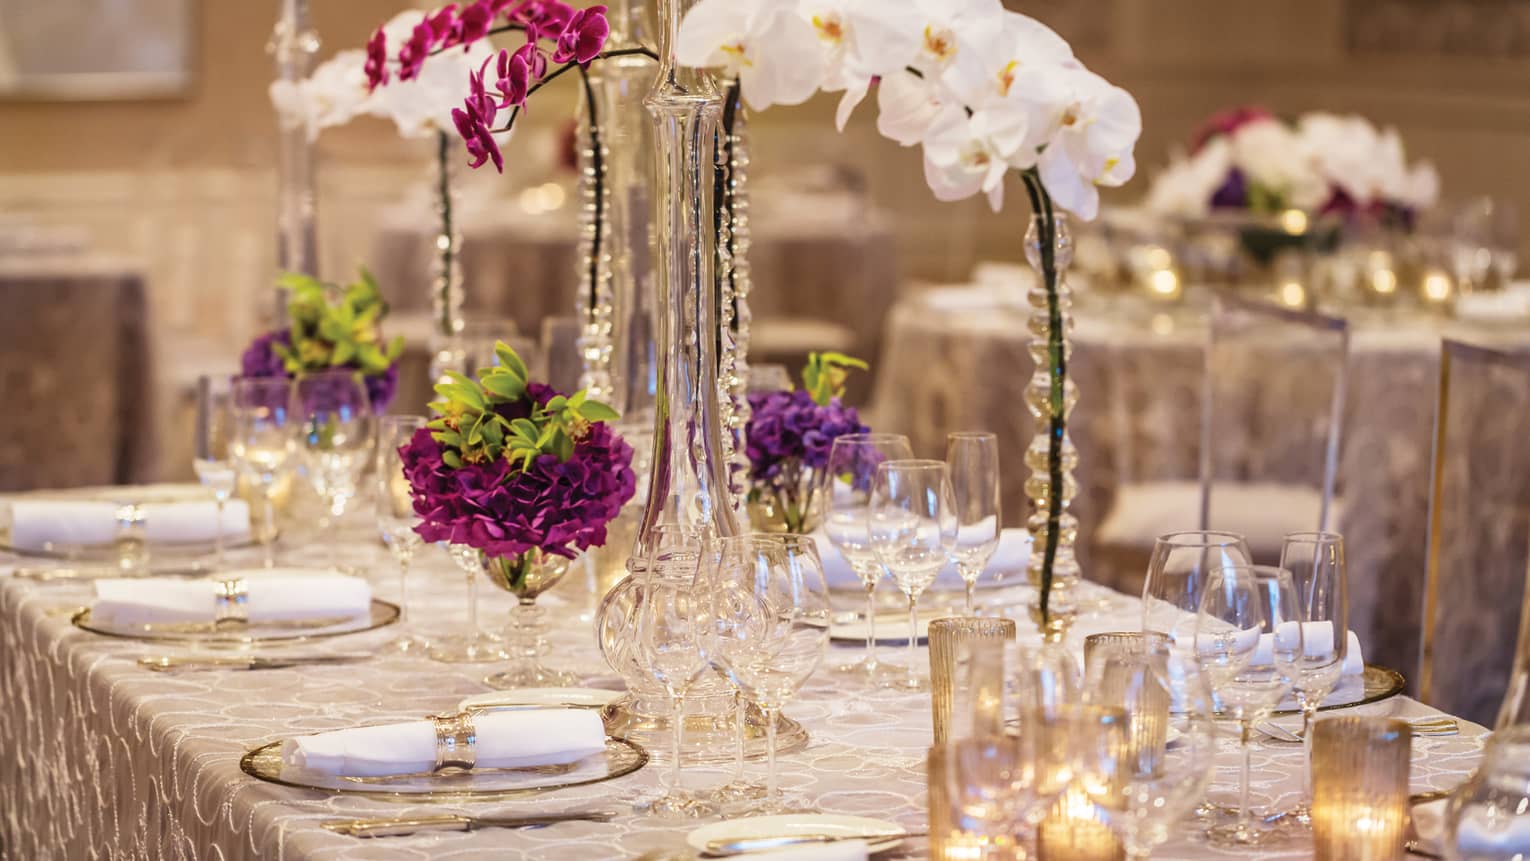 A fancy long table setting with white orchids and other purple flowers and candles as the centerpiece